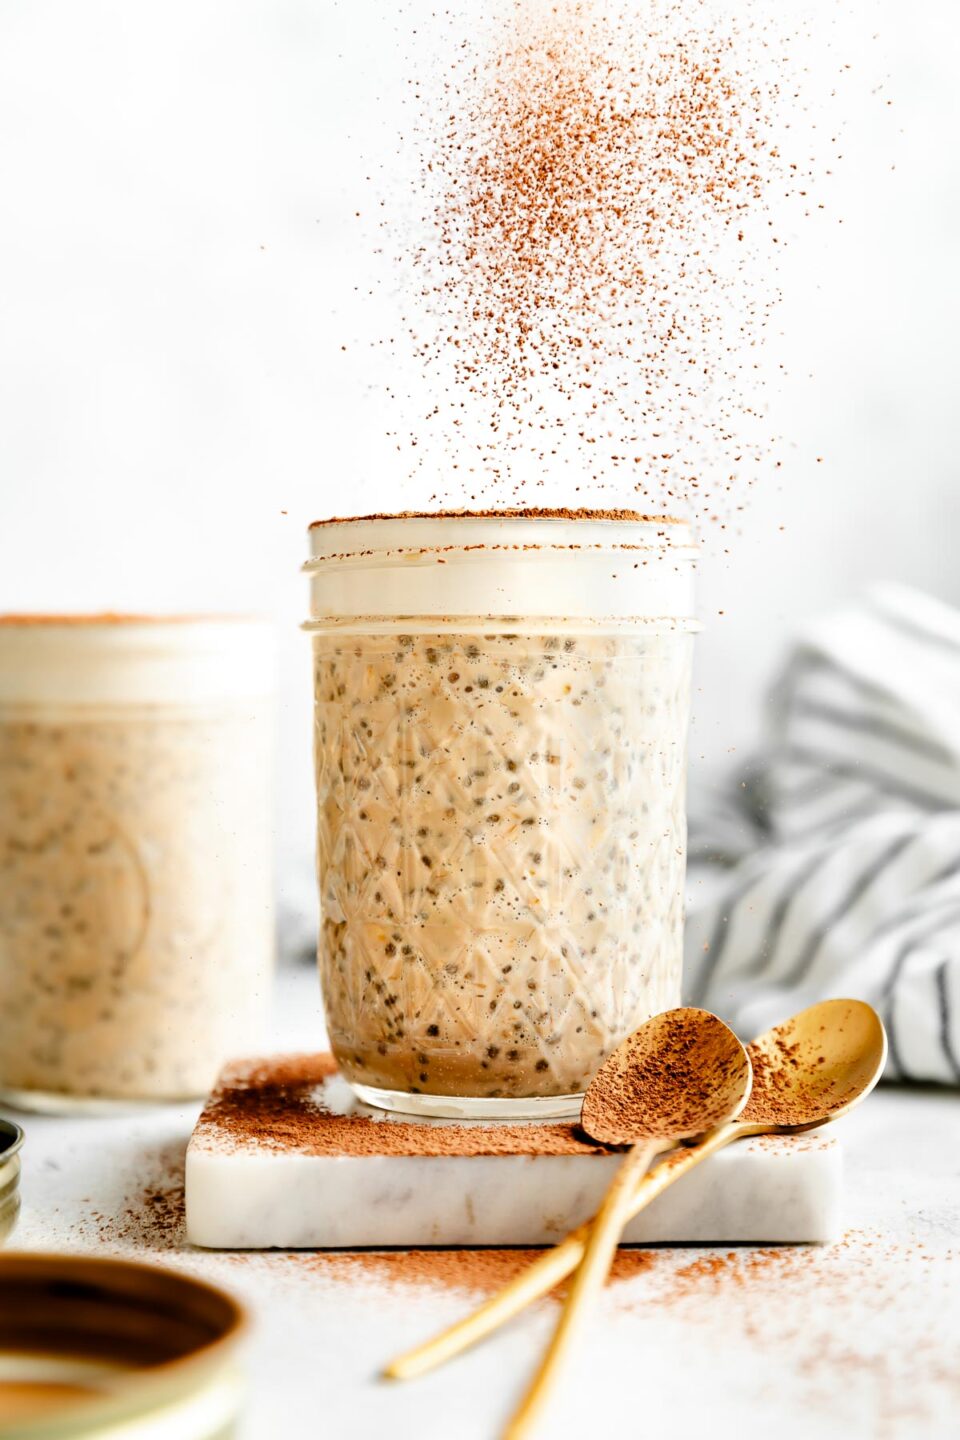 A side shot of a jar of tiramisu overnight oats sitting atop a marble coaster on a white surface. Two gold spoons rest on the coaster, and espresso powder is being sprinkled over the oats. Additional espresso powder sits at the base of the jar. A second jar of oats and a striped towel are seen in the background.